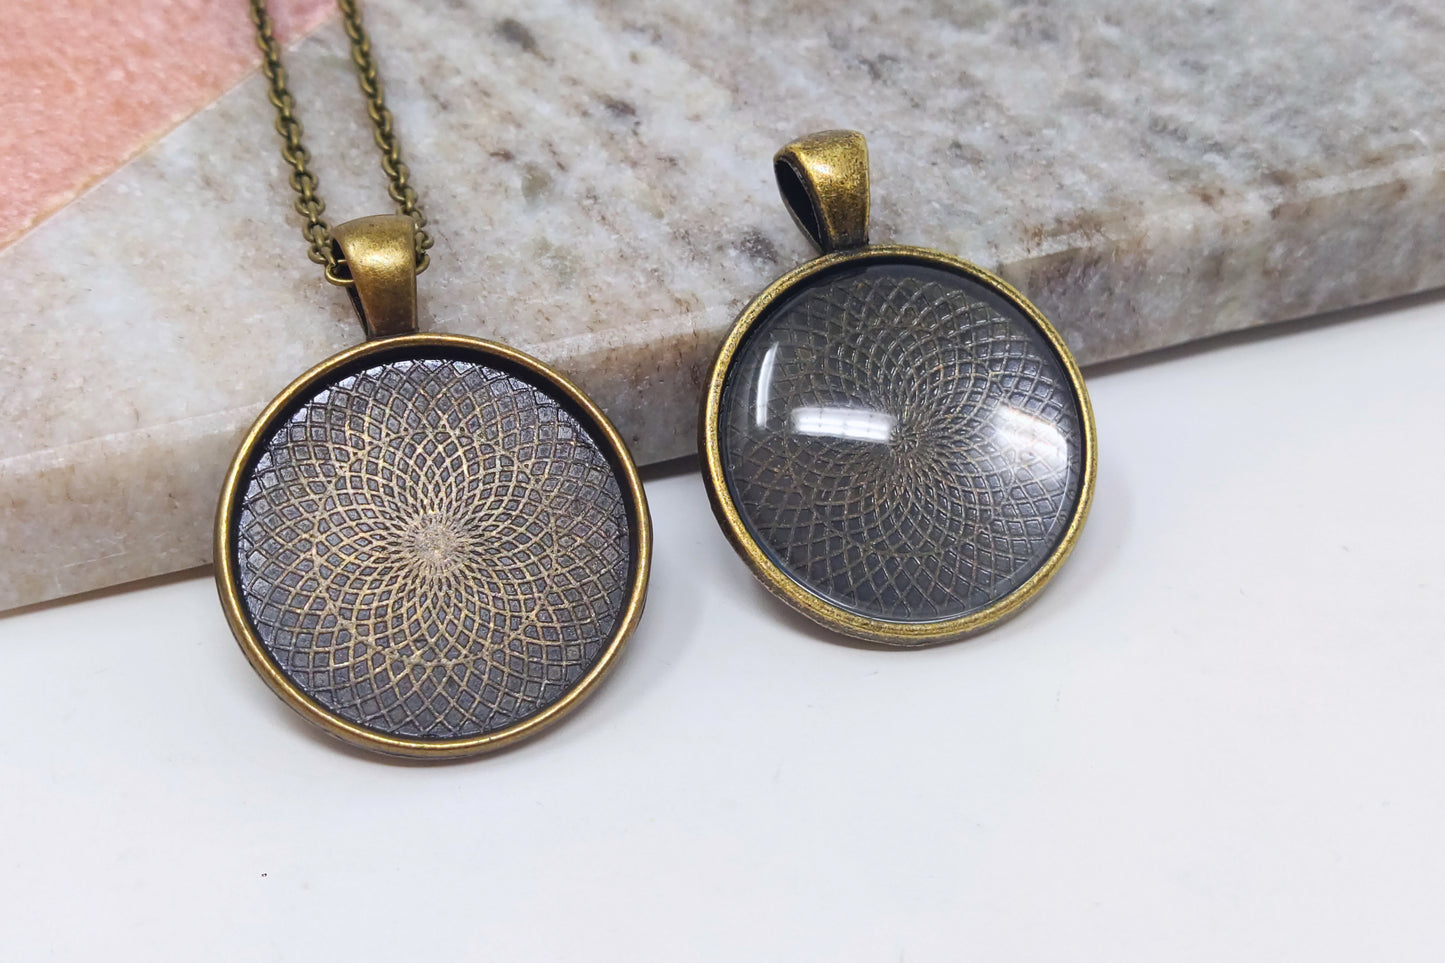 Bezels for jewelry making. In these 25mm round bezel pendant settings you can paste some cabochons, image cabochons, resin, gemstone cabochons and more. Add stylish look to your DIY jewelry making projects with our bronze cabochon settings.